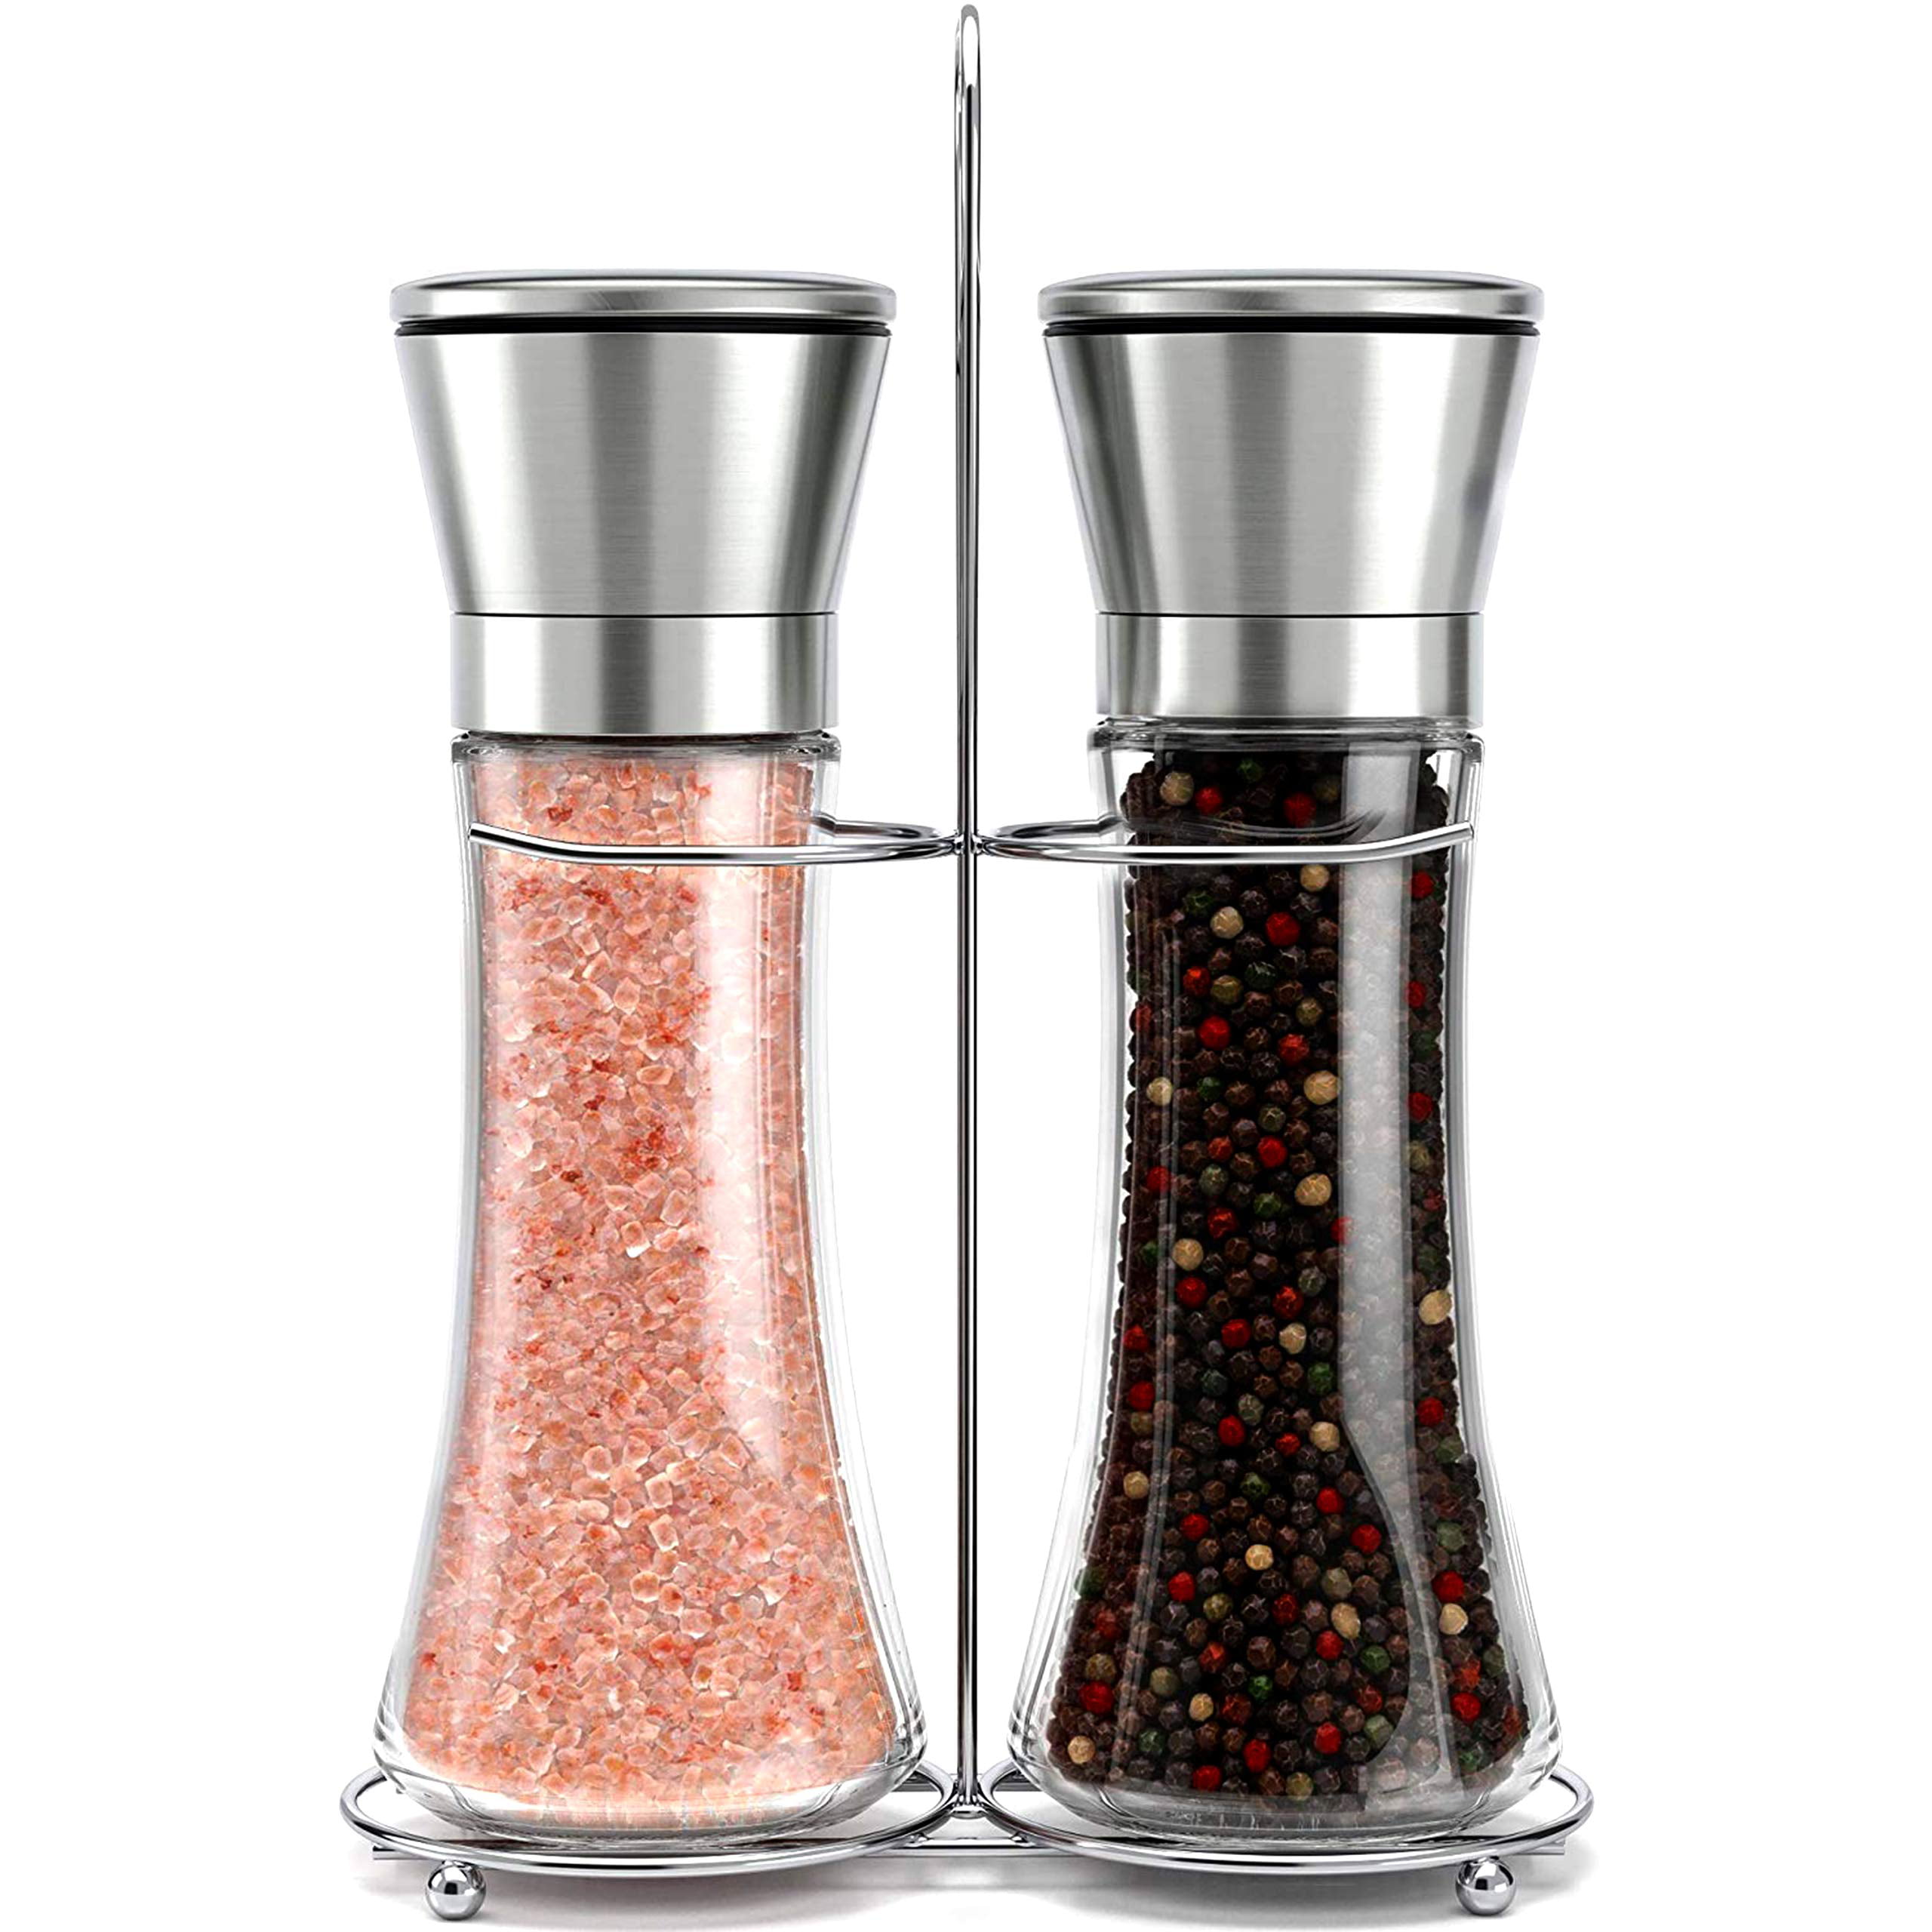 Tall Glass Salt and Pepper Shakers Premium Stainless Steel Salt and Pepper Grinder Set of 2 Pepper Mill & Salt Mill with Free Funnel & EBook Adjustable Ceramic Sea Salt Grinder & Pepper Grinder